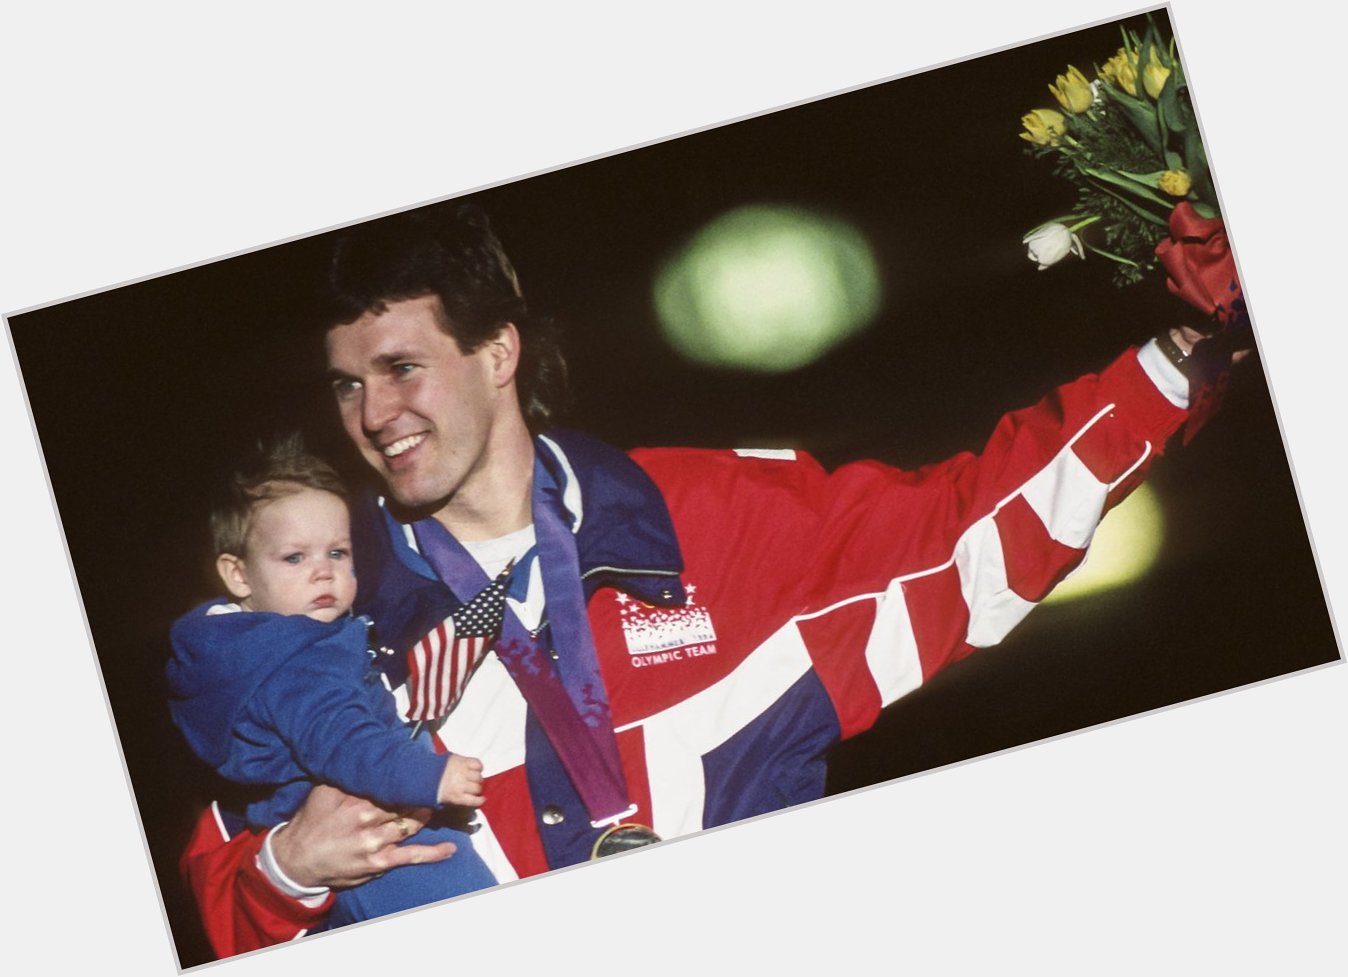 Happy birthday Dan Jansen! My all-time favorite Olympic moment was Jansen winning his first Gold Medal. 